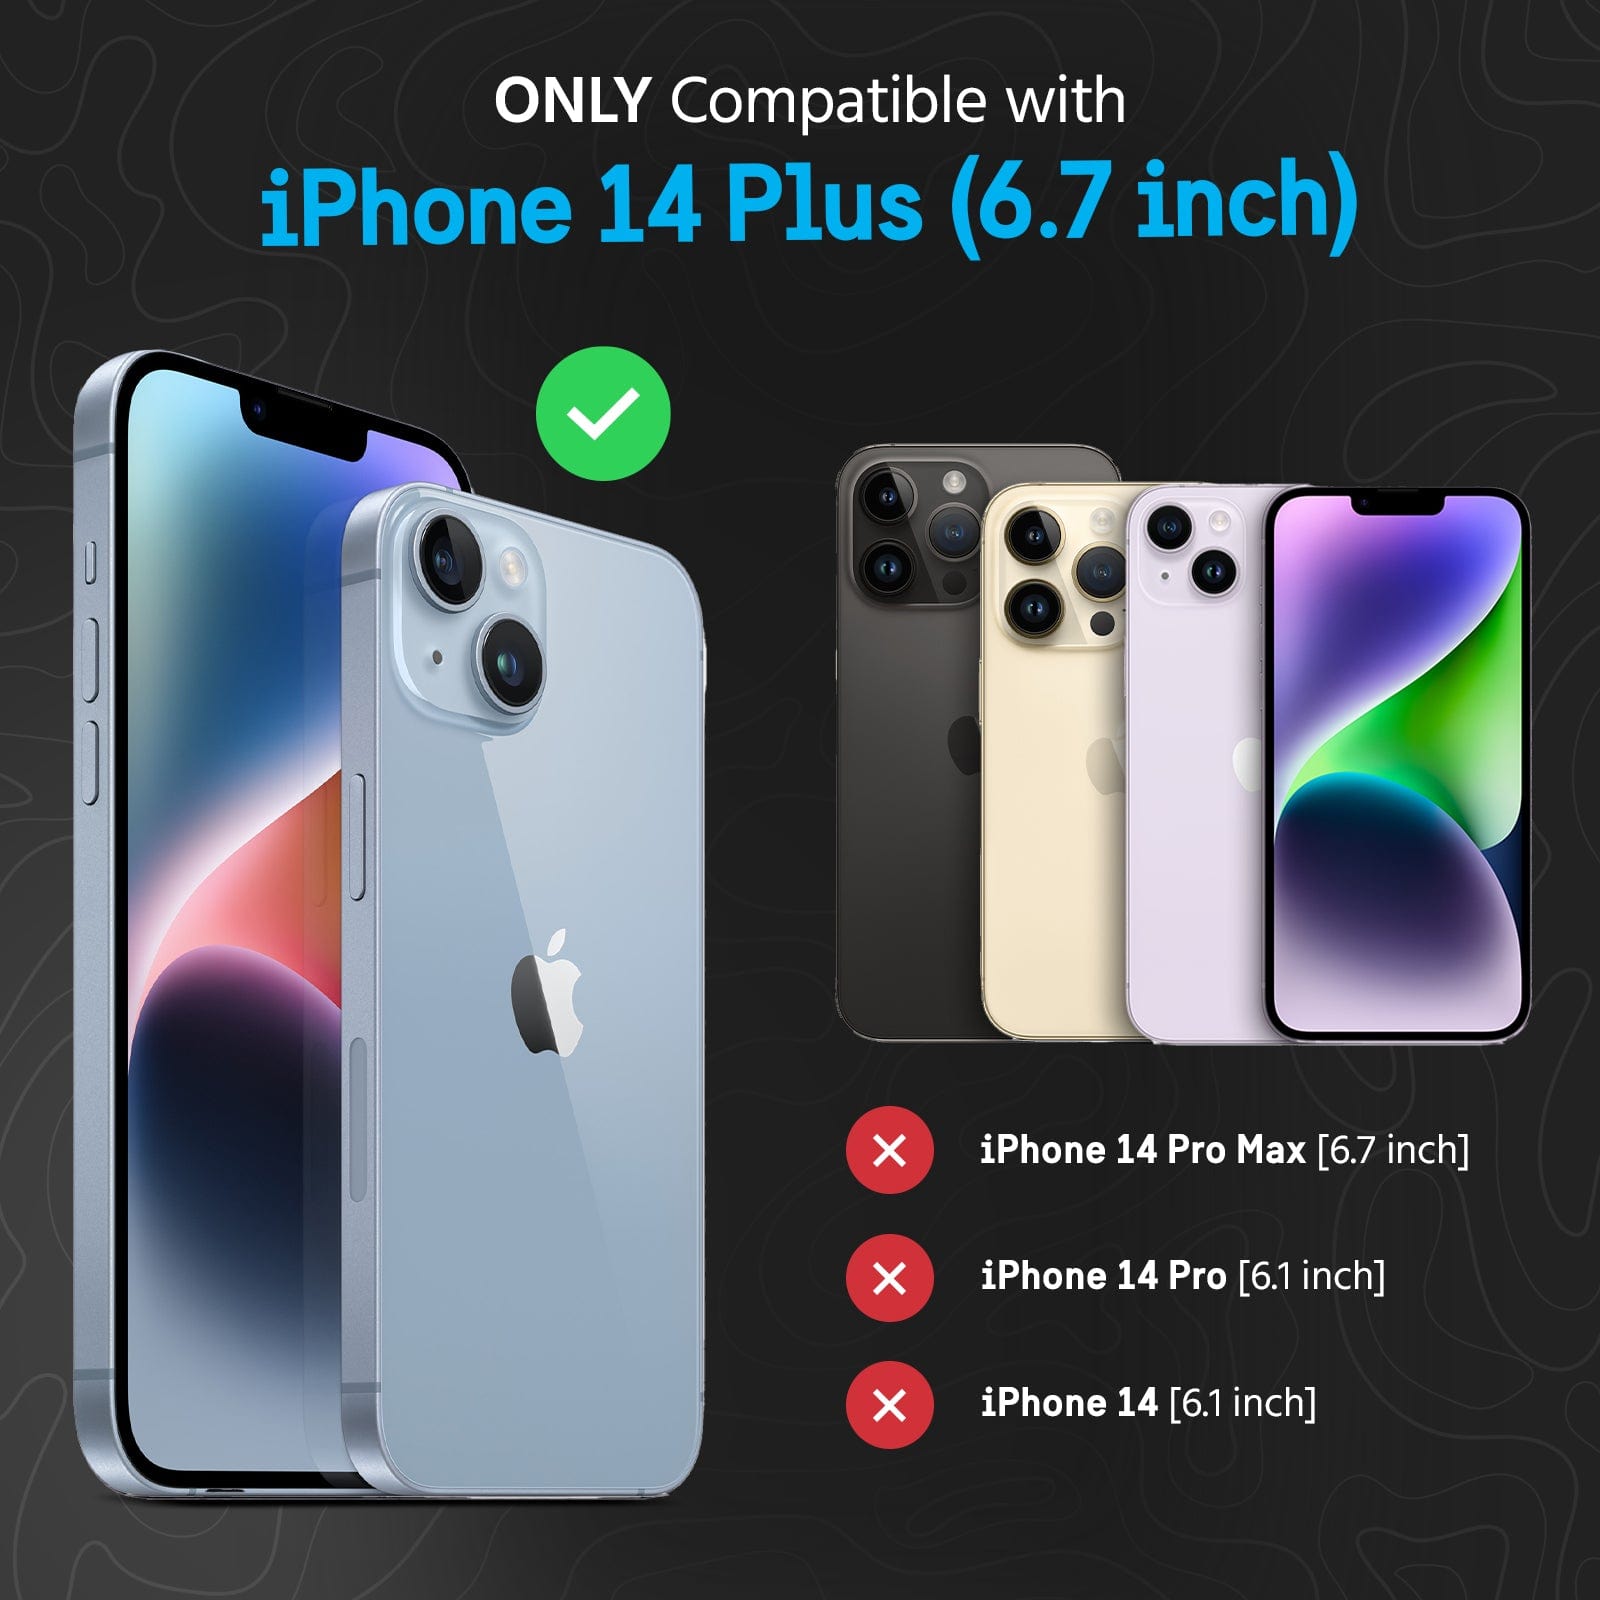 ONLY COMPATIBLE WITH IPHONE 14 PLUS (6.7 INCH)